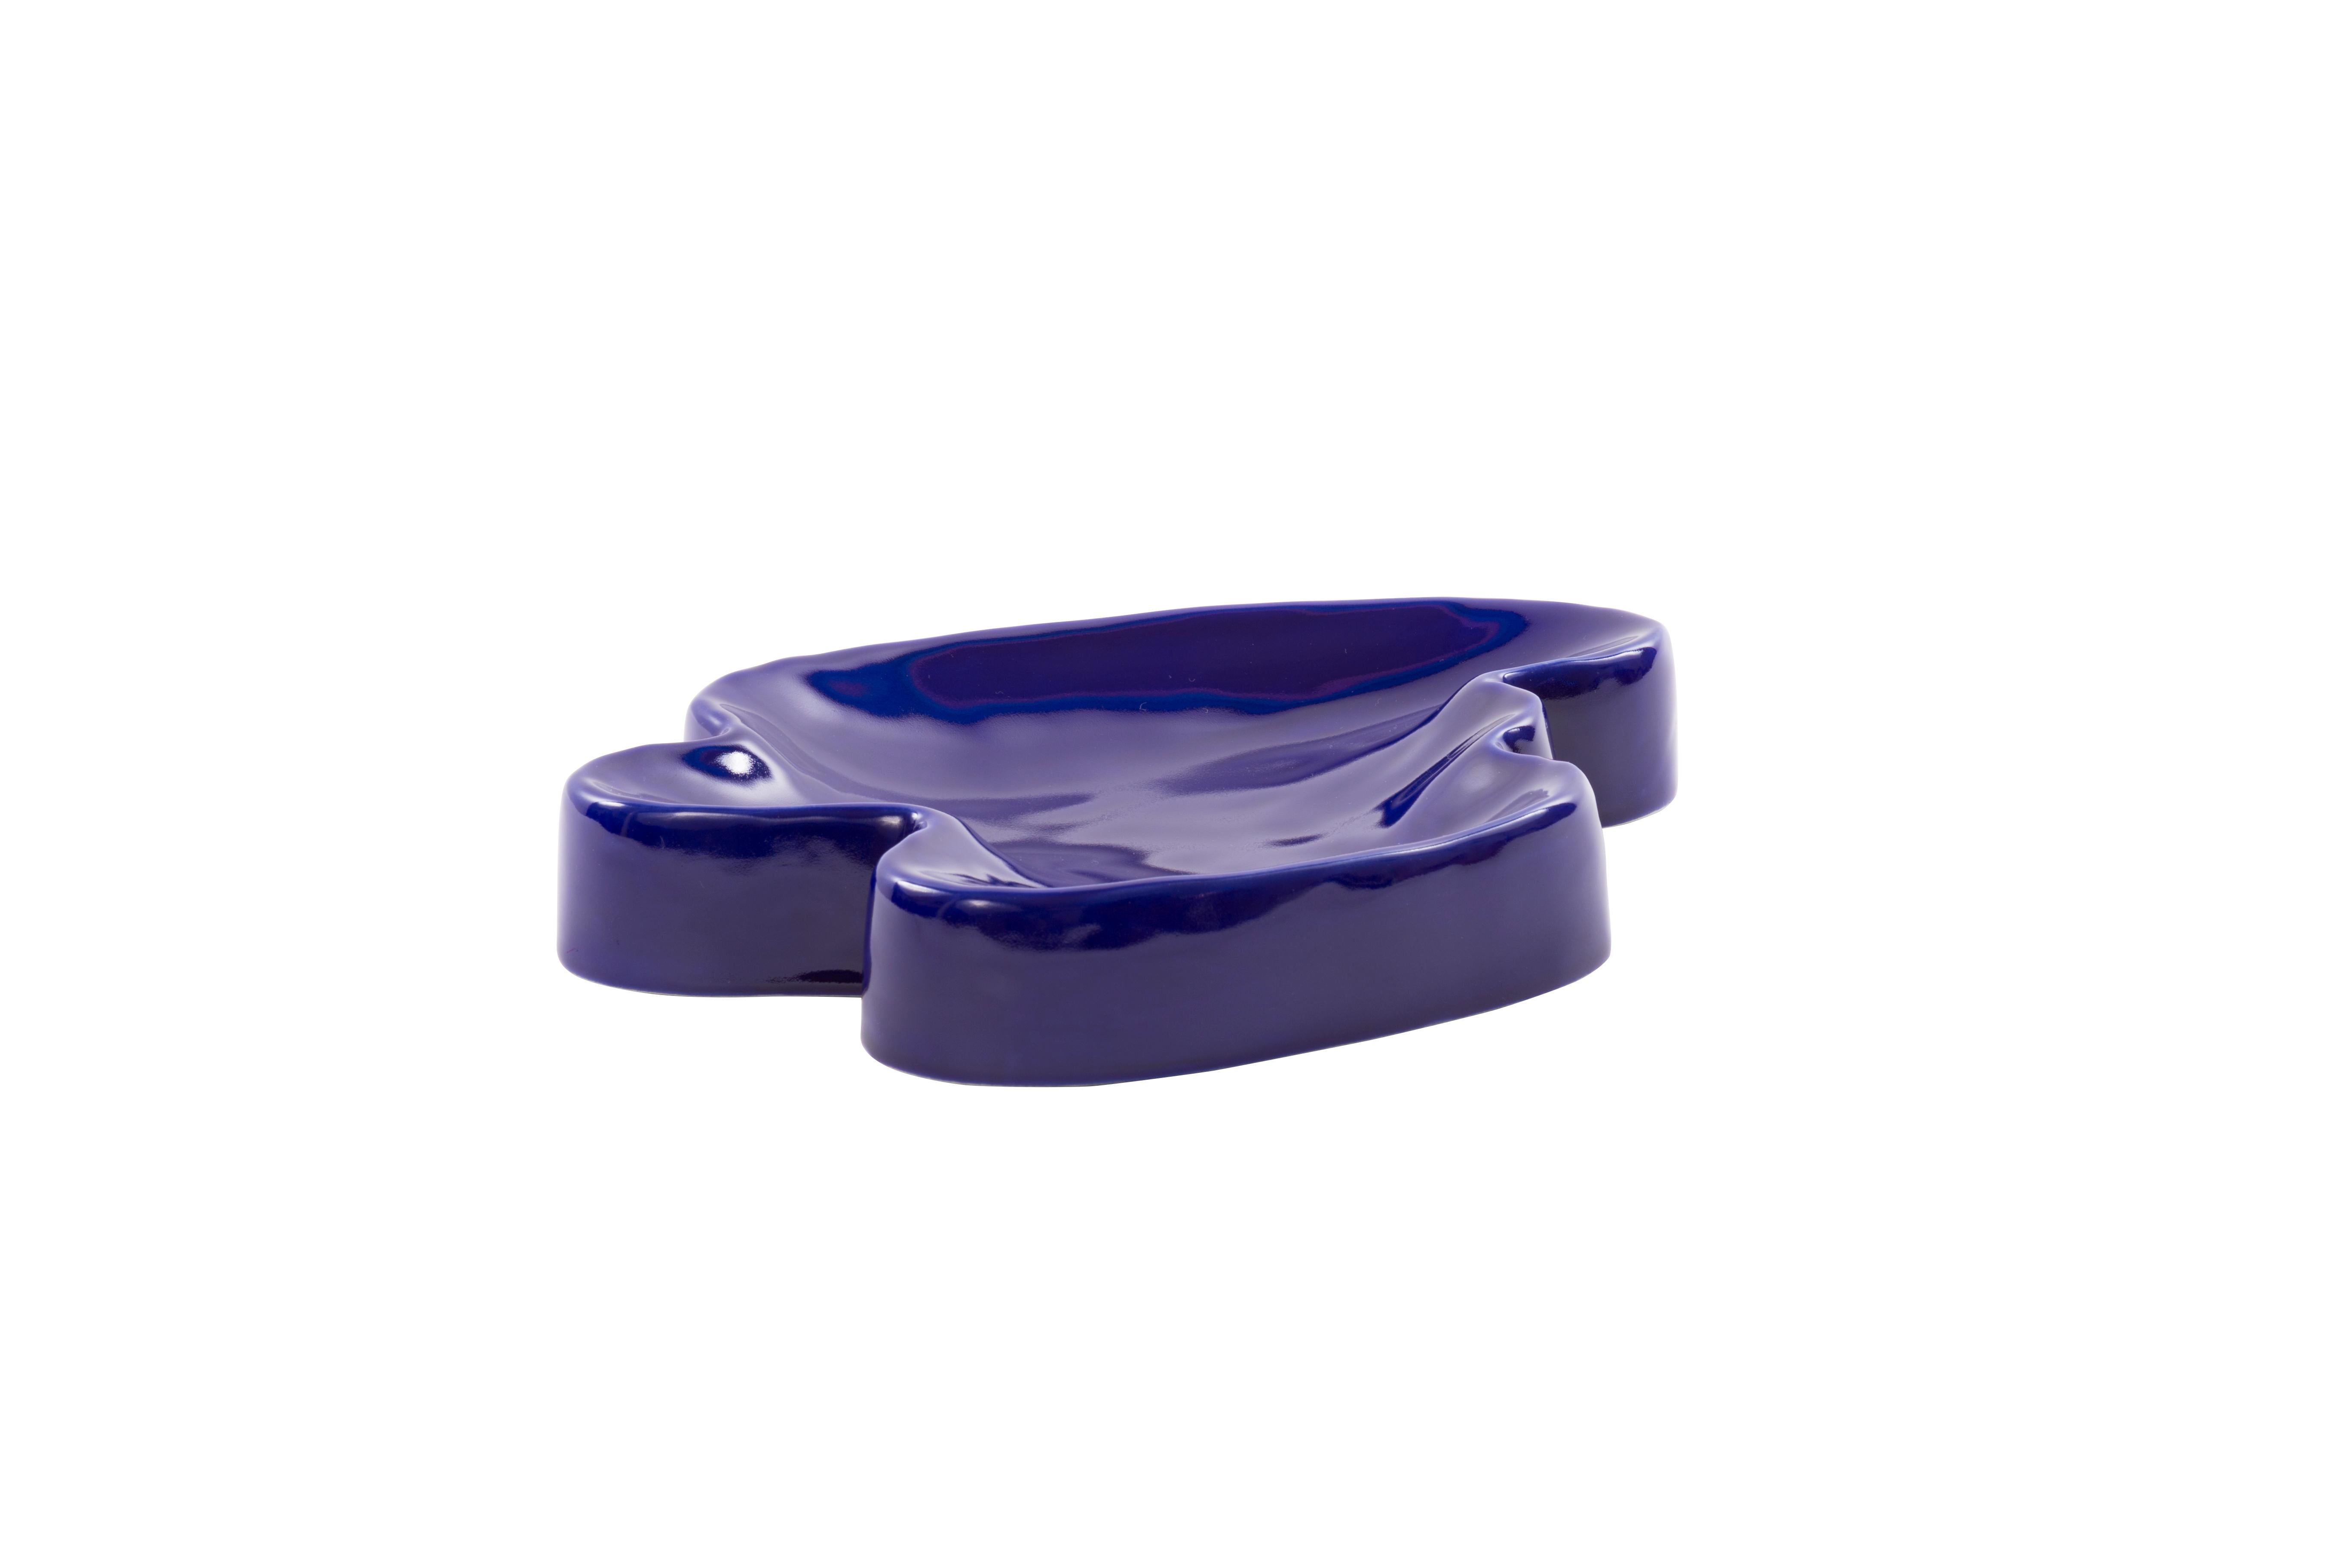 Lake Small Cobalt Tray by Pulpo